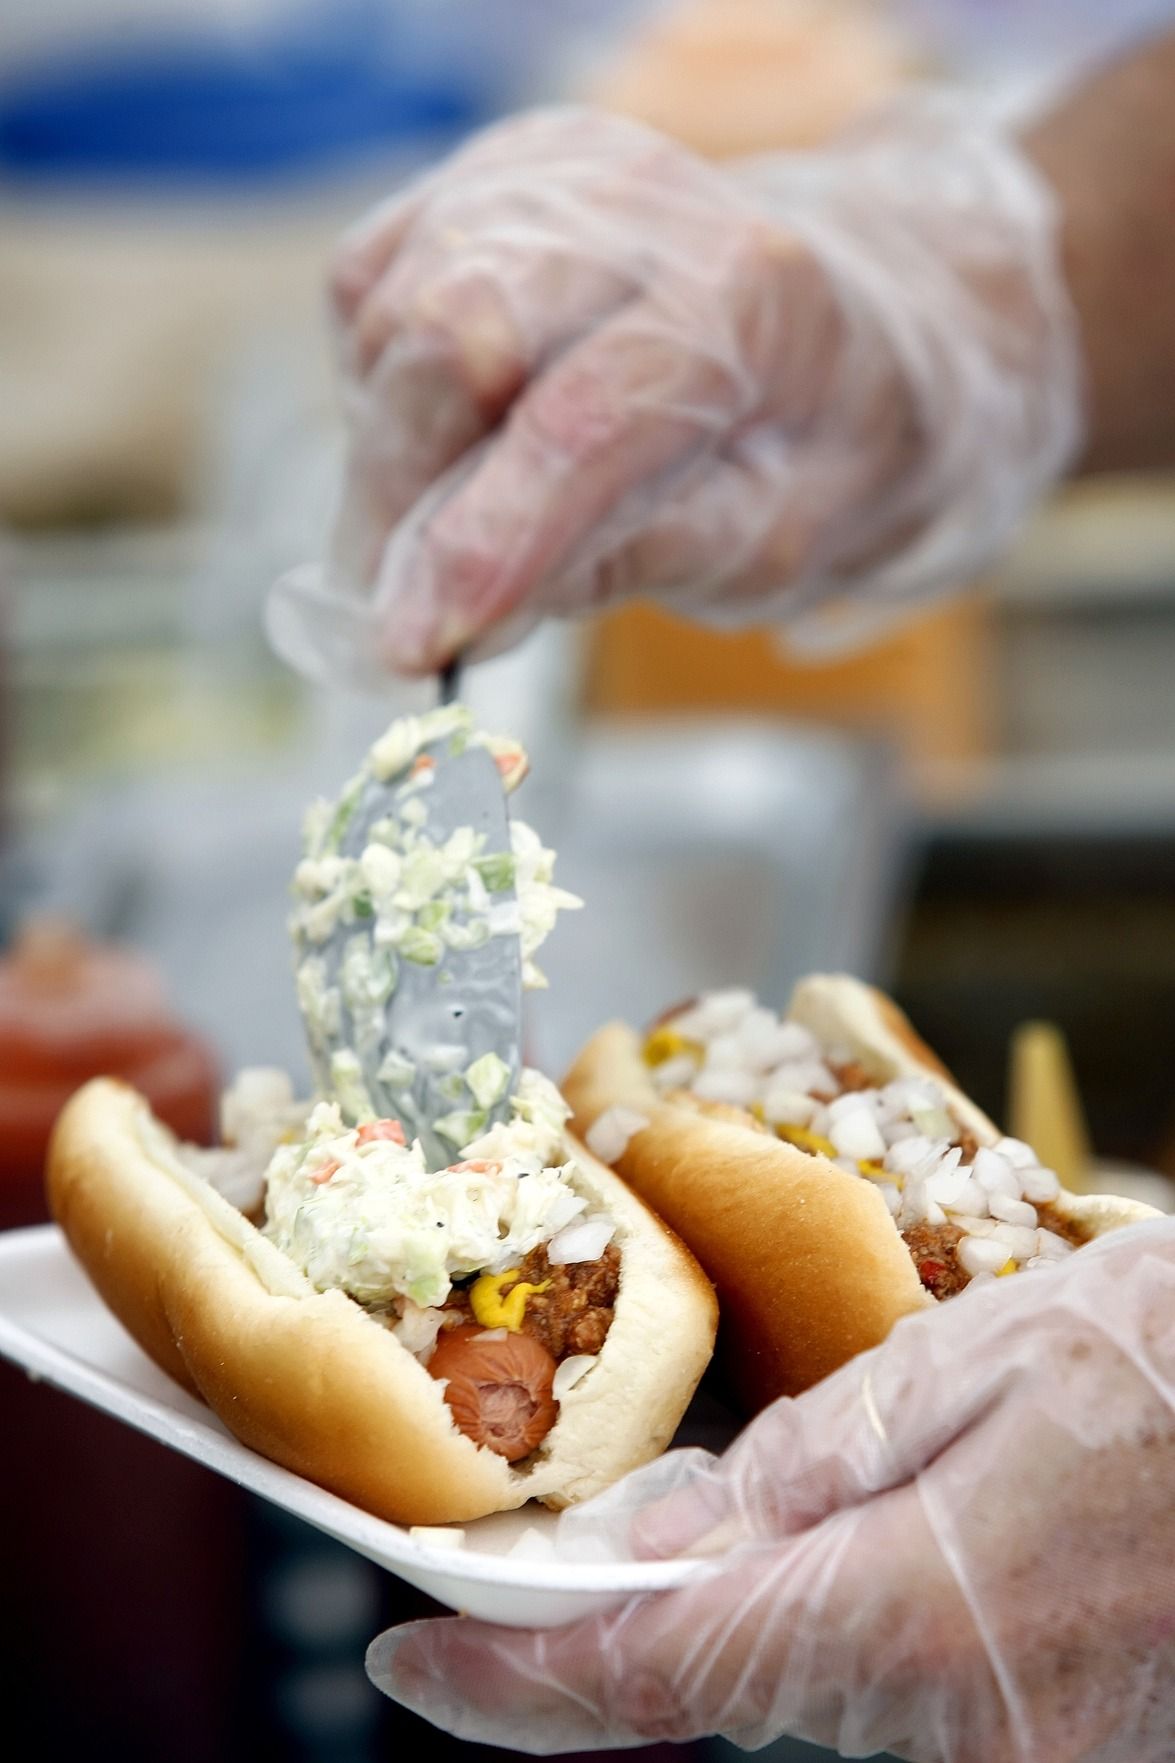 West Virginia Hot Dog Festival arrives this Saturday Features